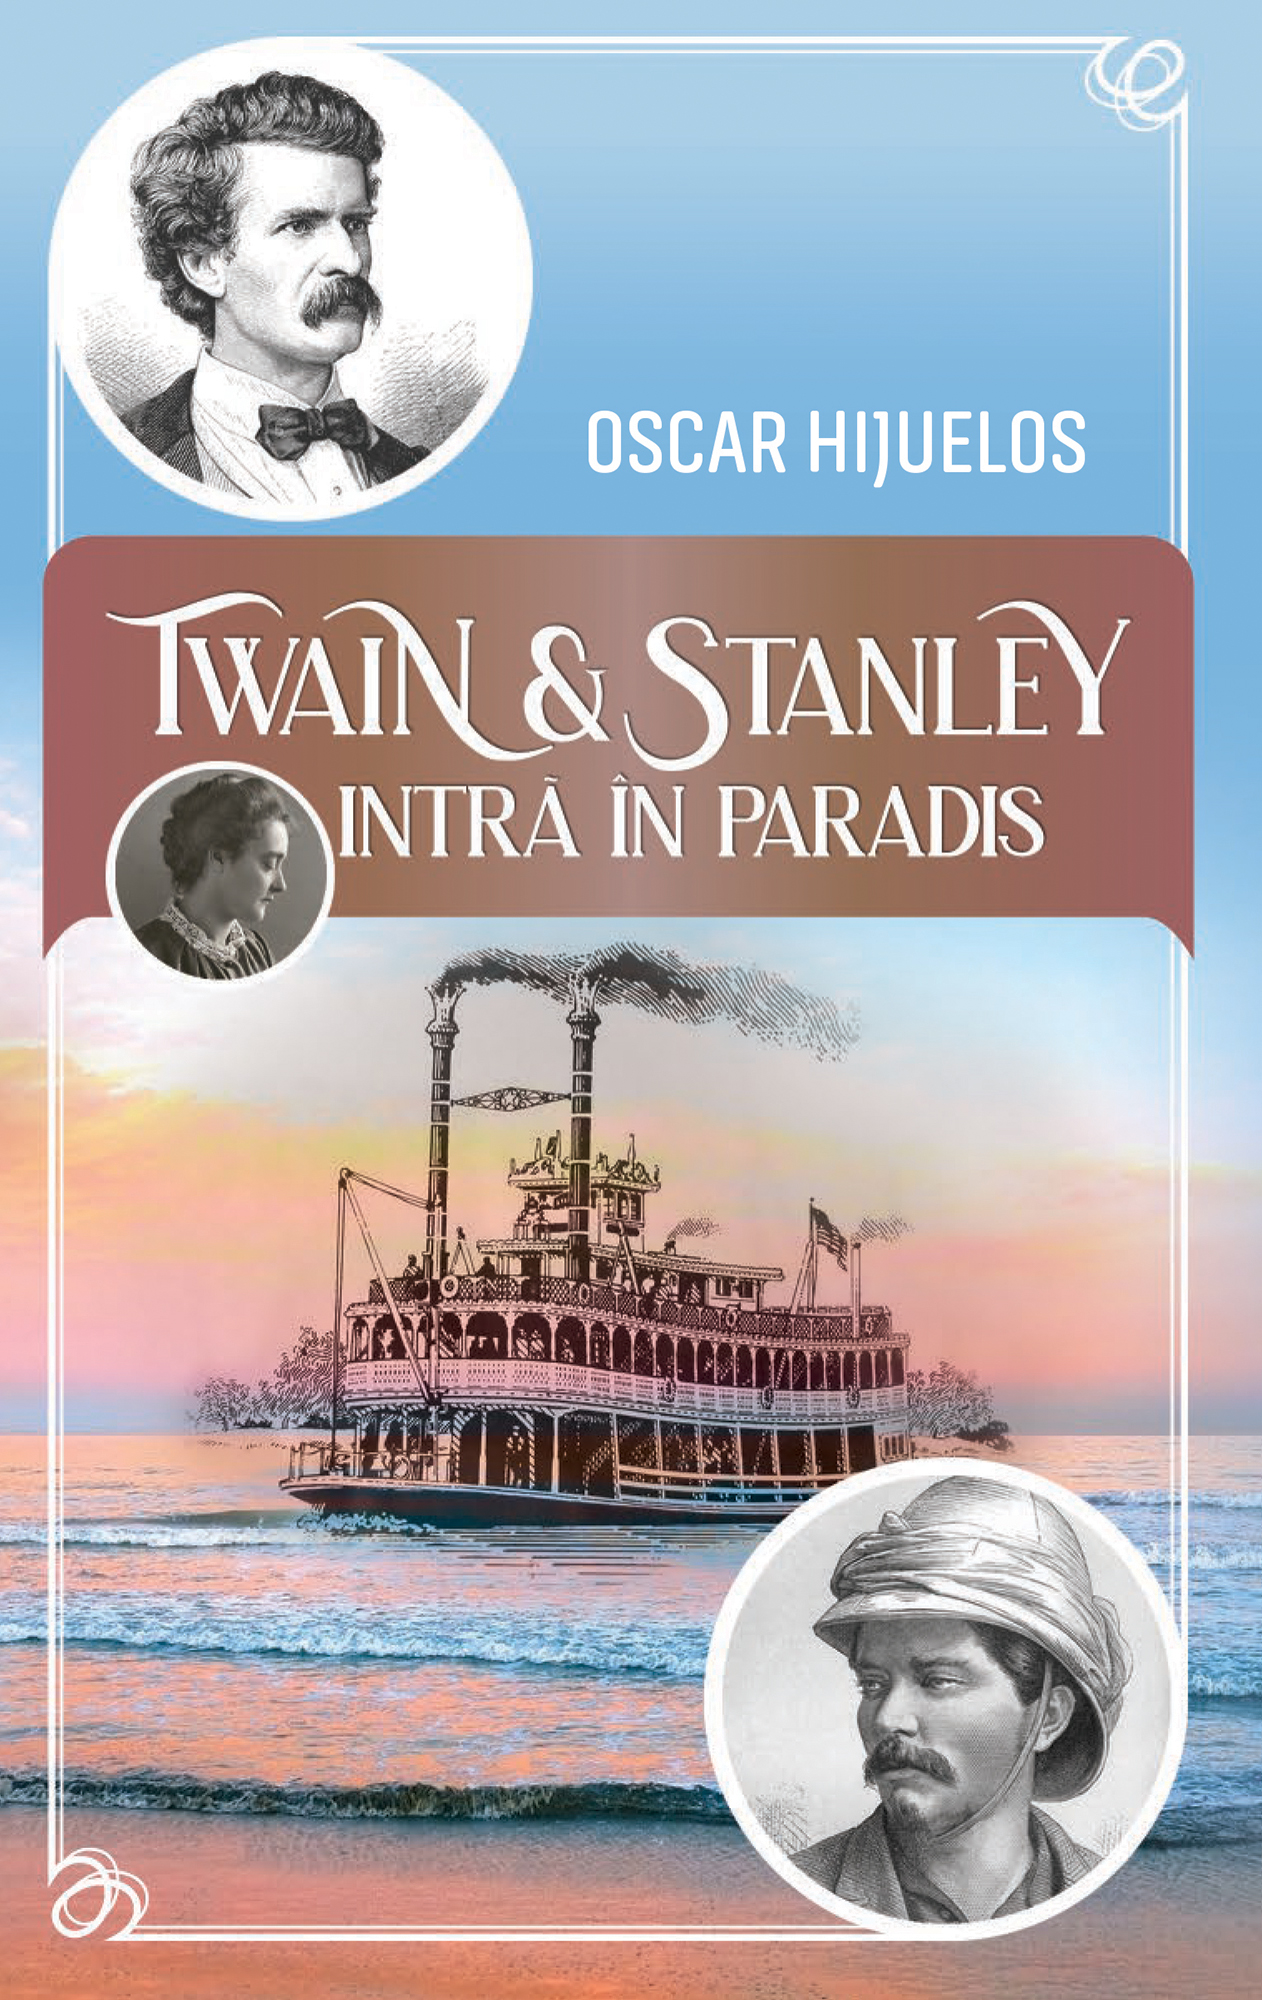 Twain si Stanley intra in paradis